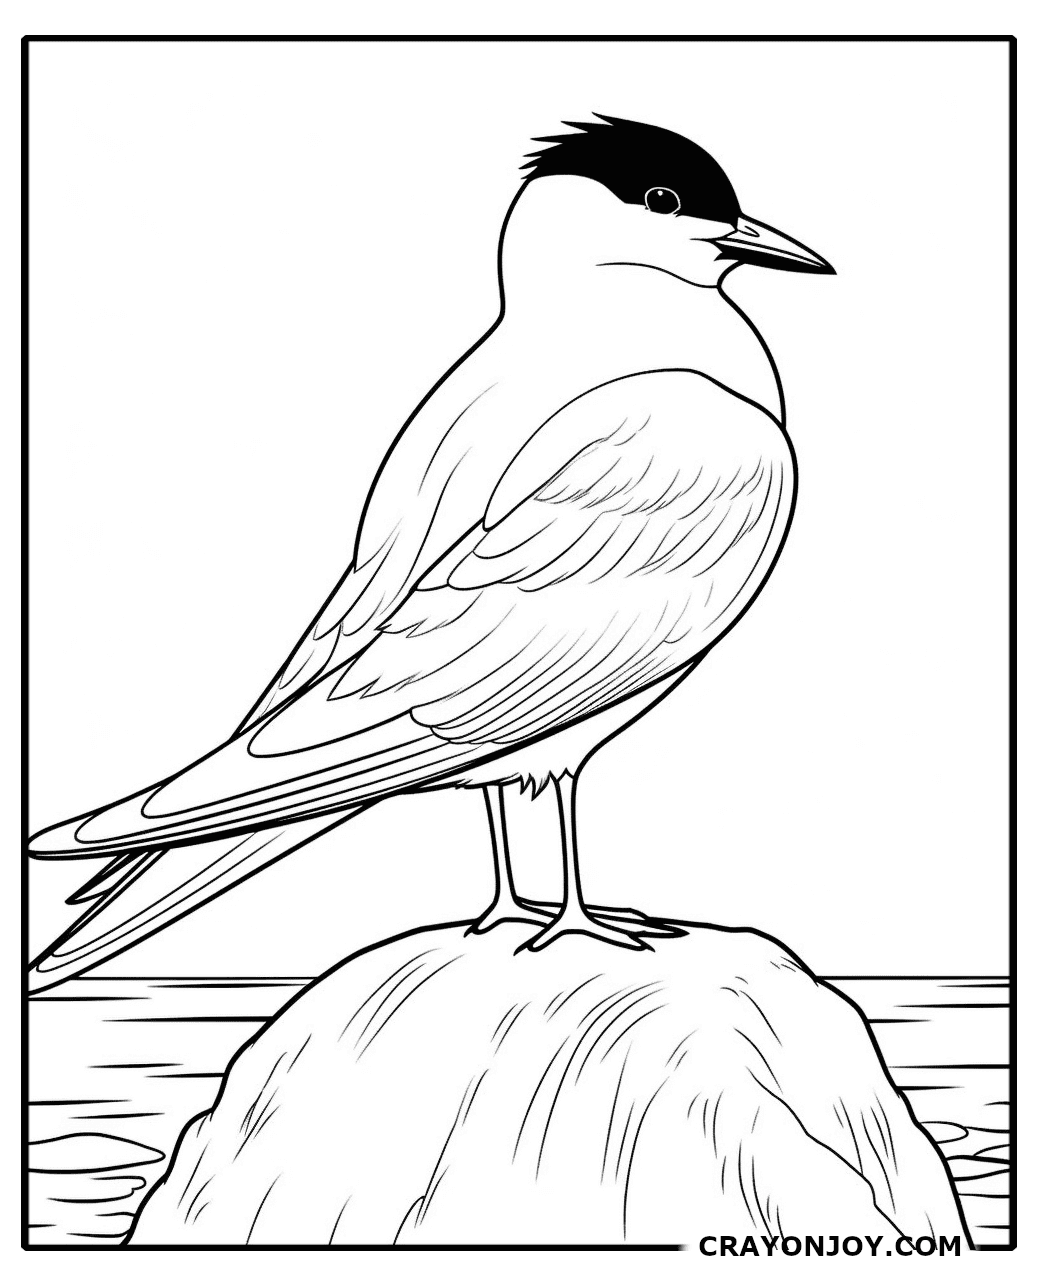 Arctic-Tern Coloring Pages: Free Printable Sheets for Kids